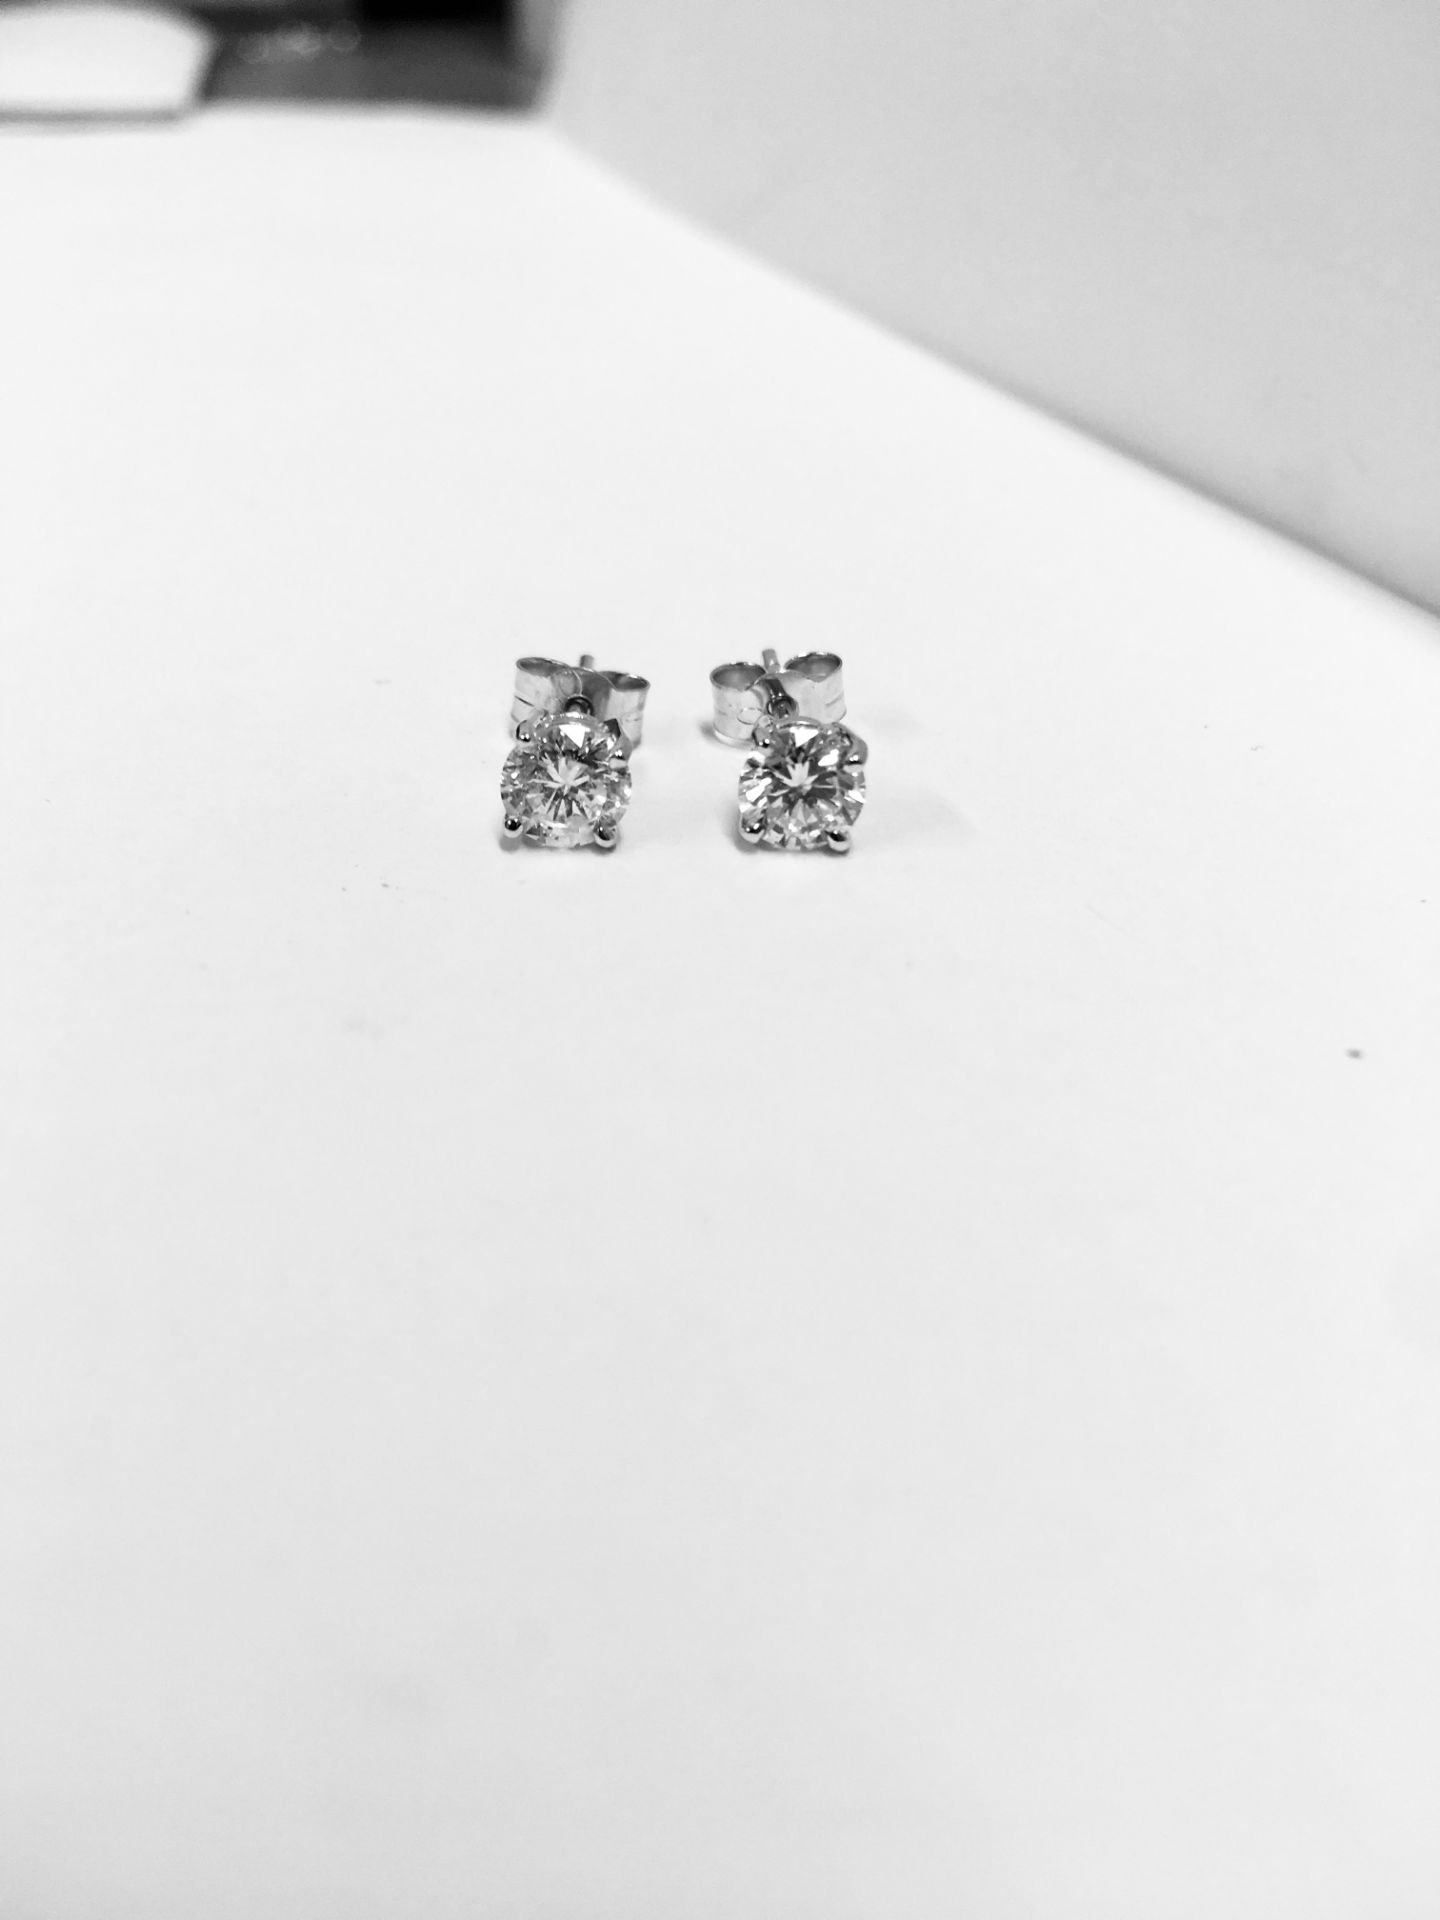 1.00ct diamond solitaire earrings set in 18ct white gold. 2 x brilliant cut diamonds, 0.50ct ( - Image 4 of 4